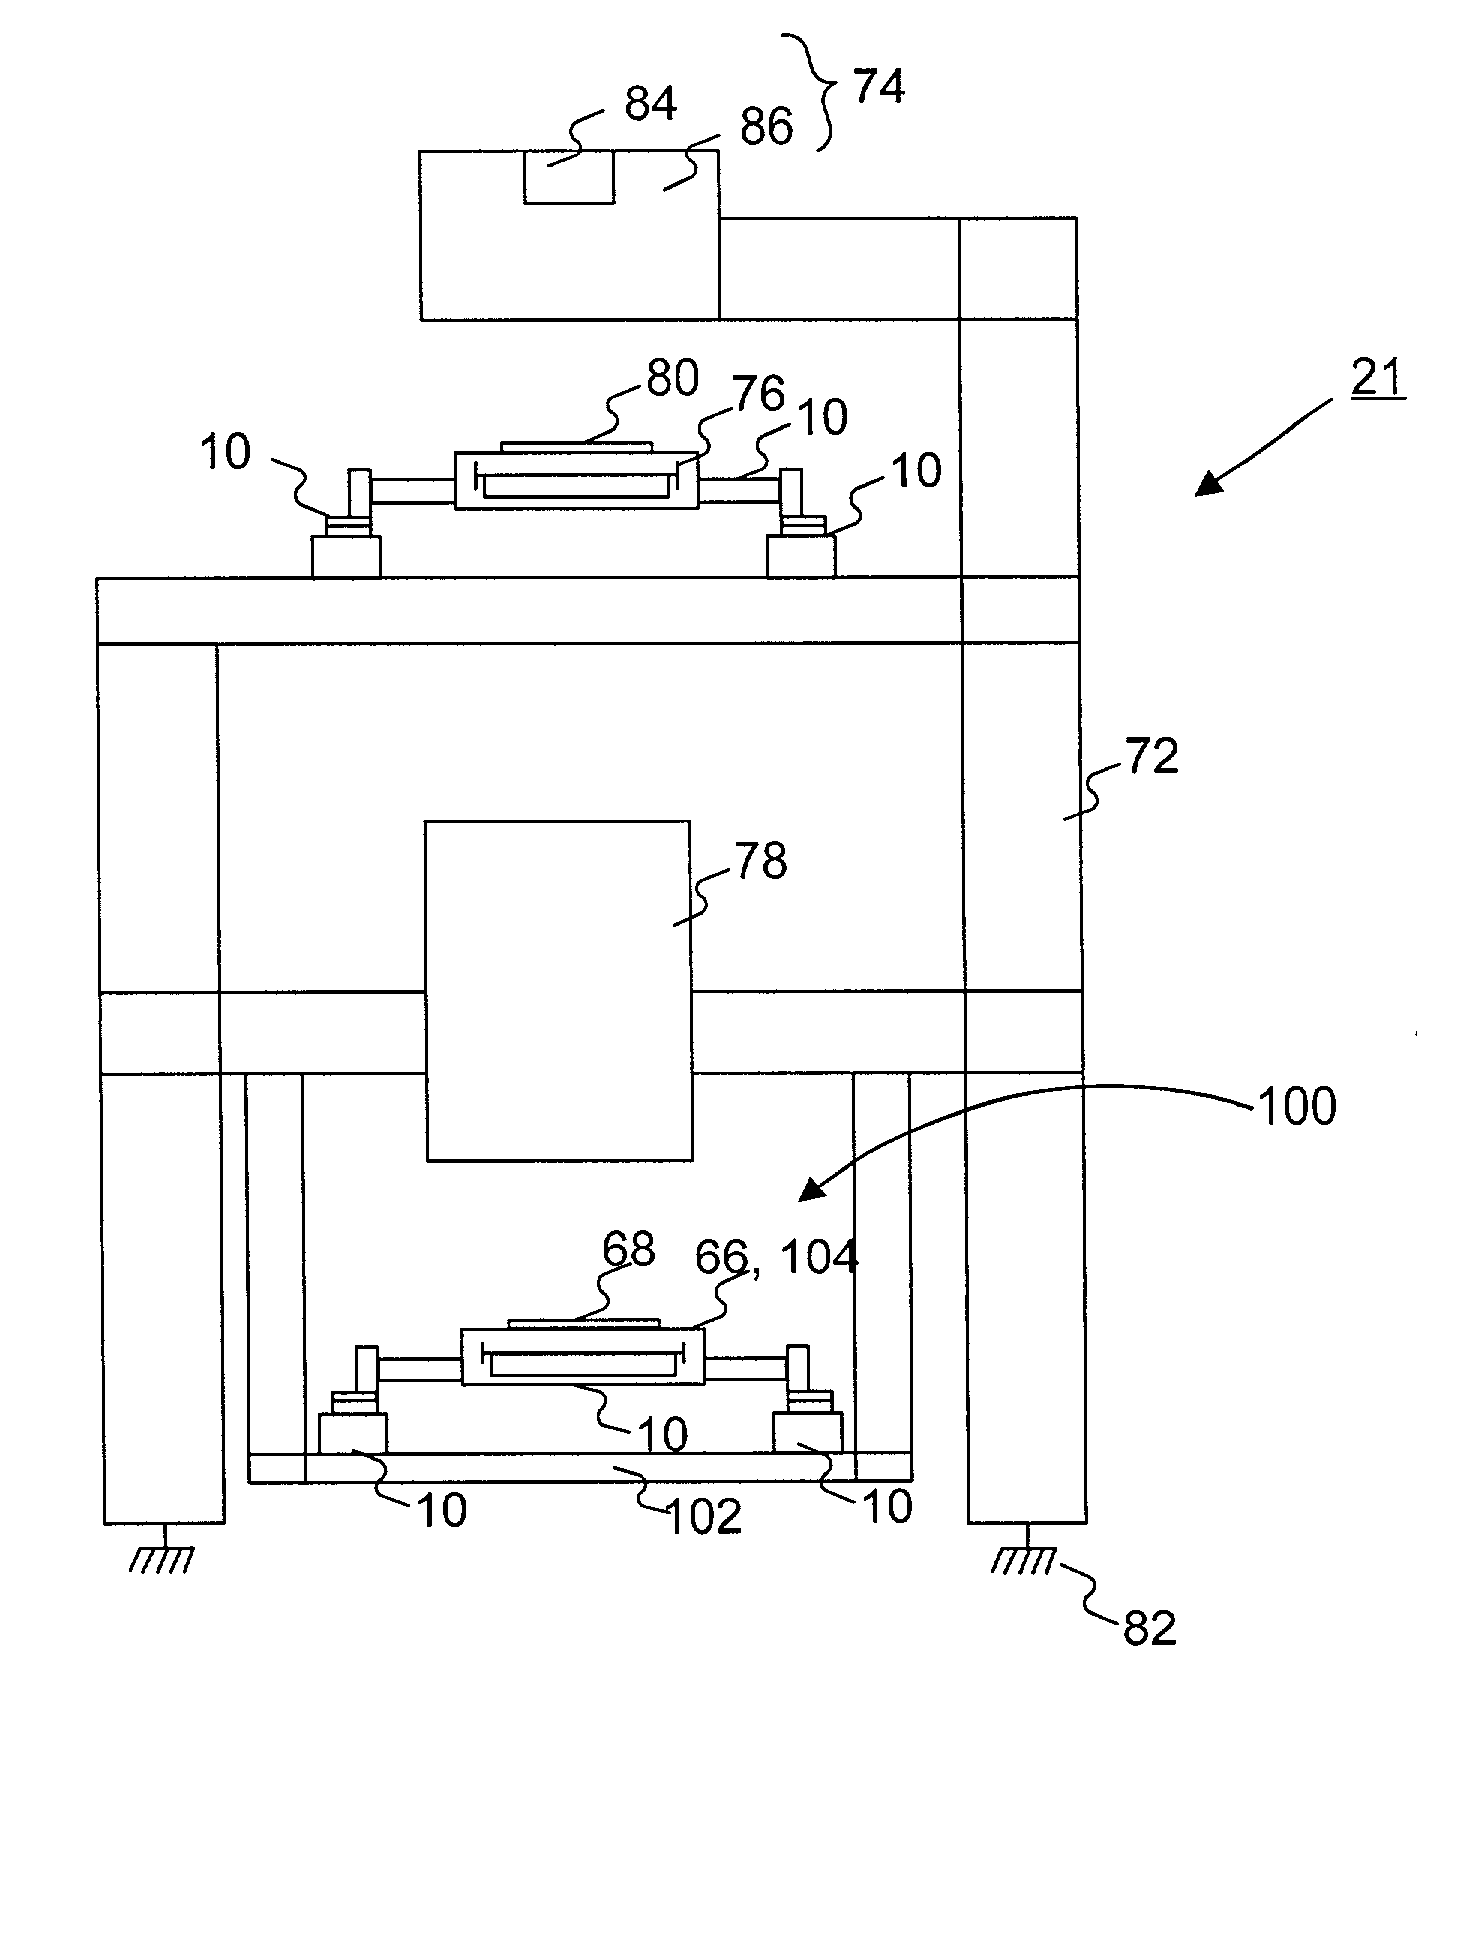 Reaction mass for a stage device